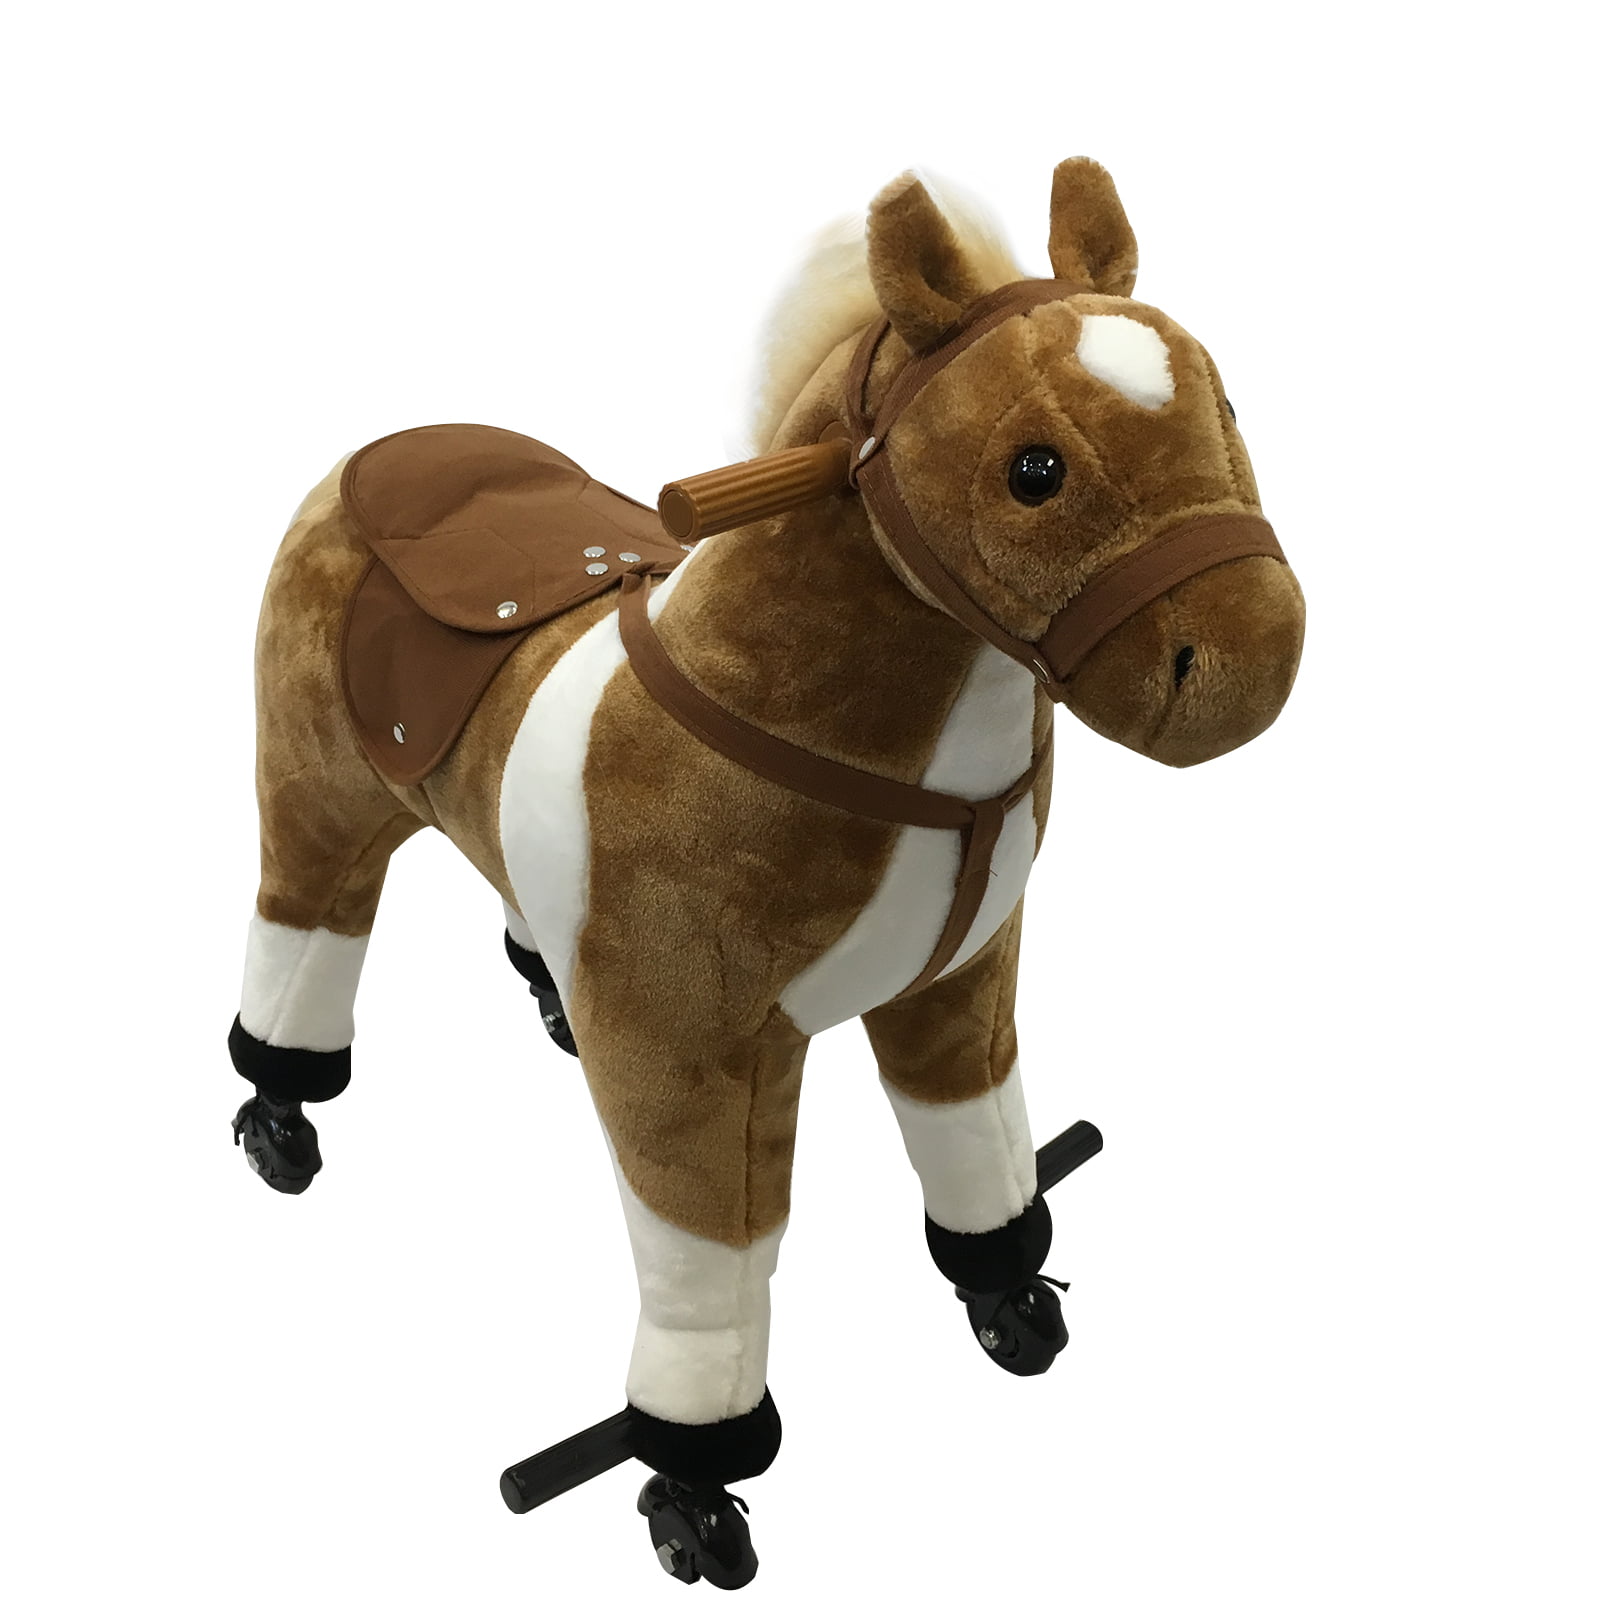 toy horse kids can ride